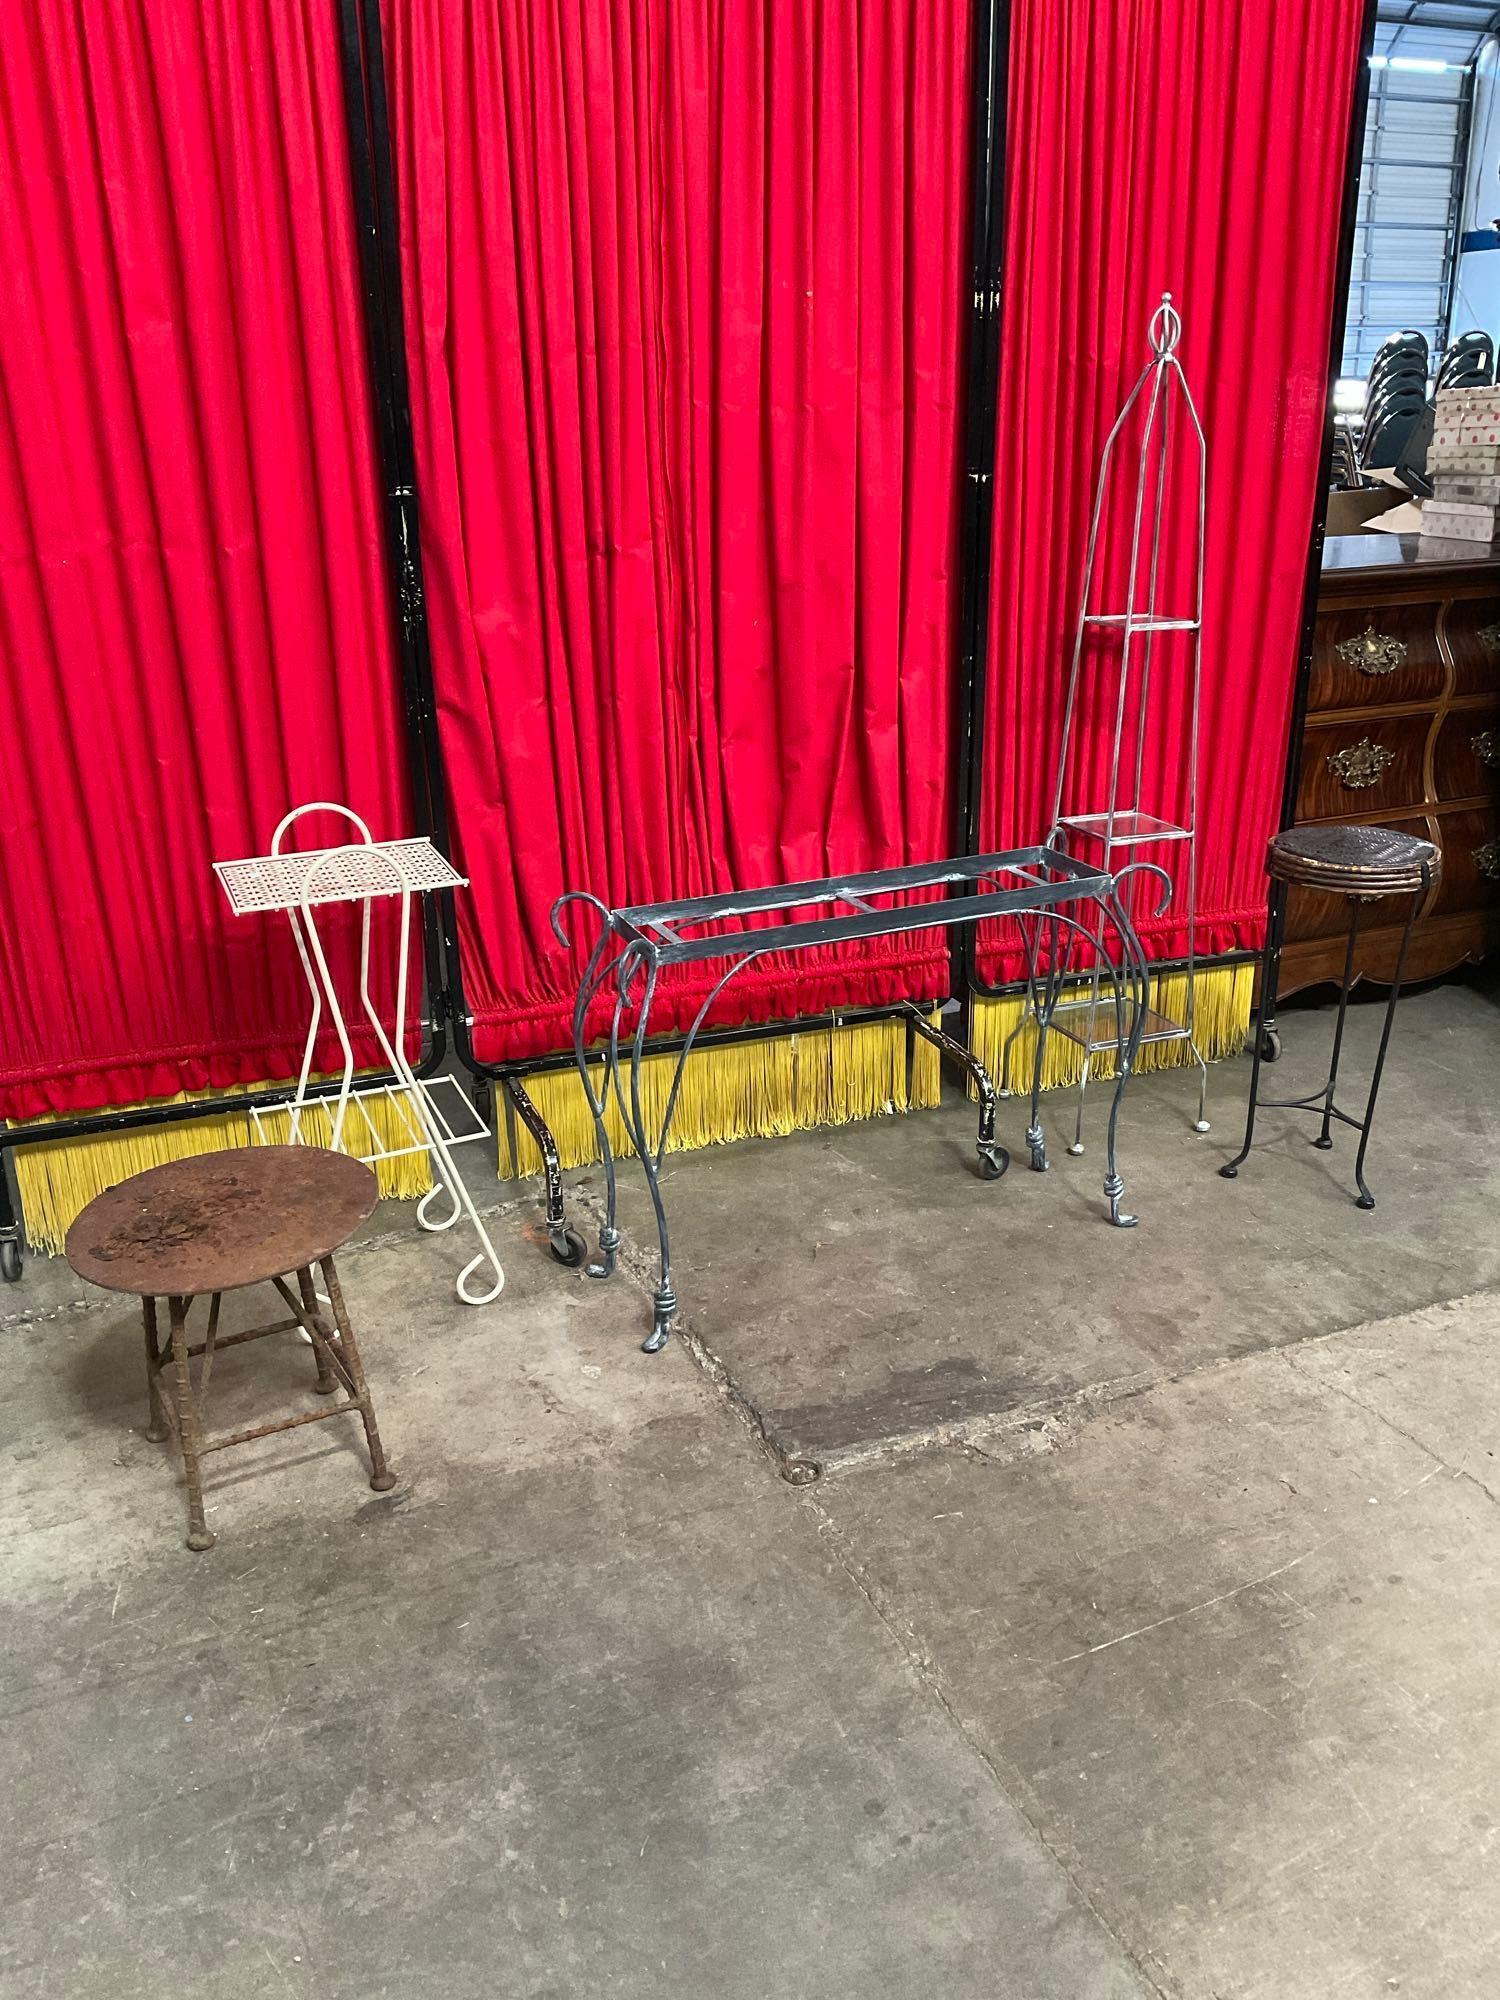 5 pcs Vintage Metal Planter Stand Assortment. Primitive Stool. Wire Stand w/ Glass Shelves. See